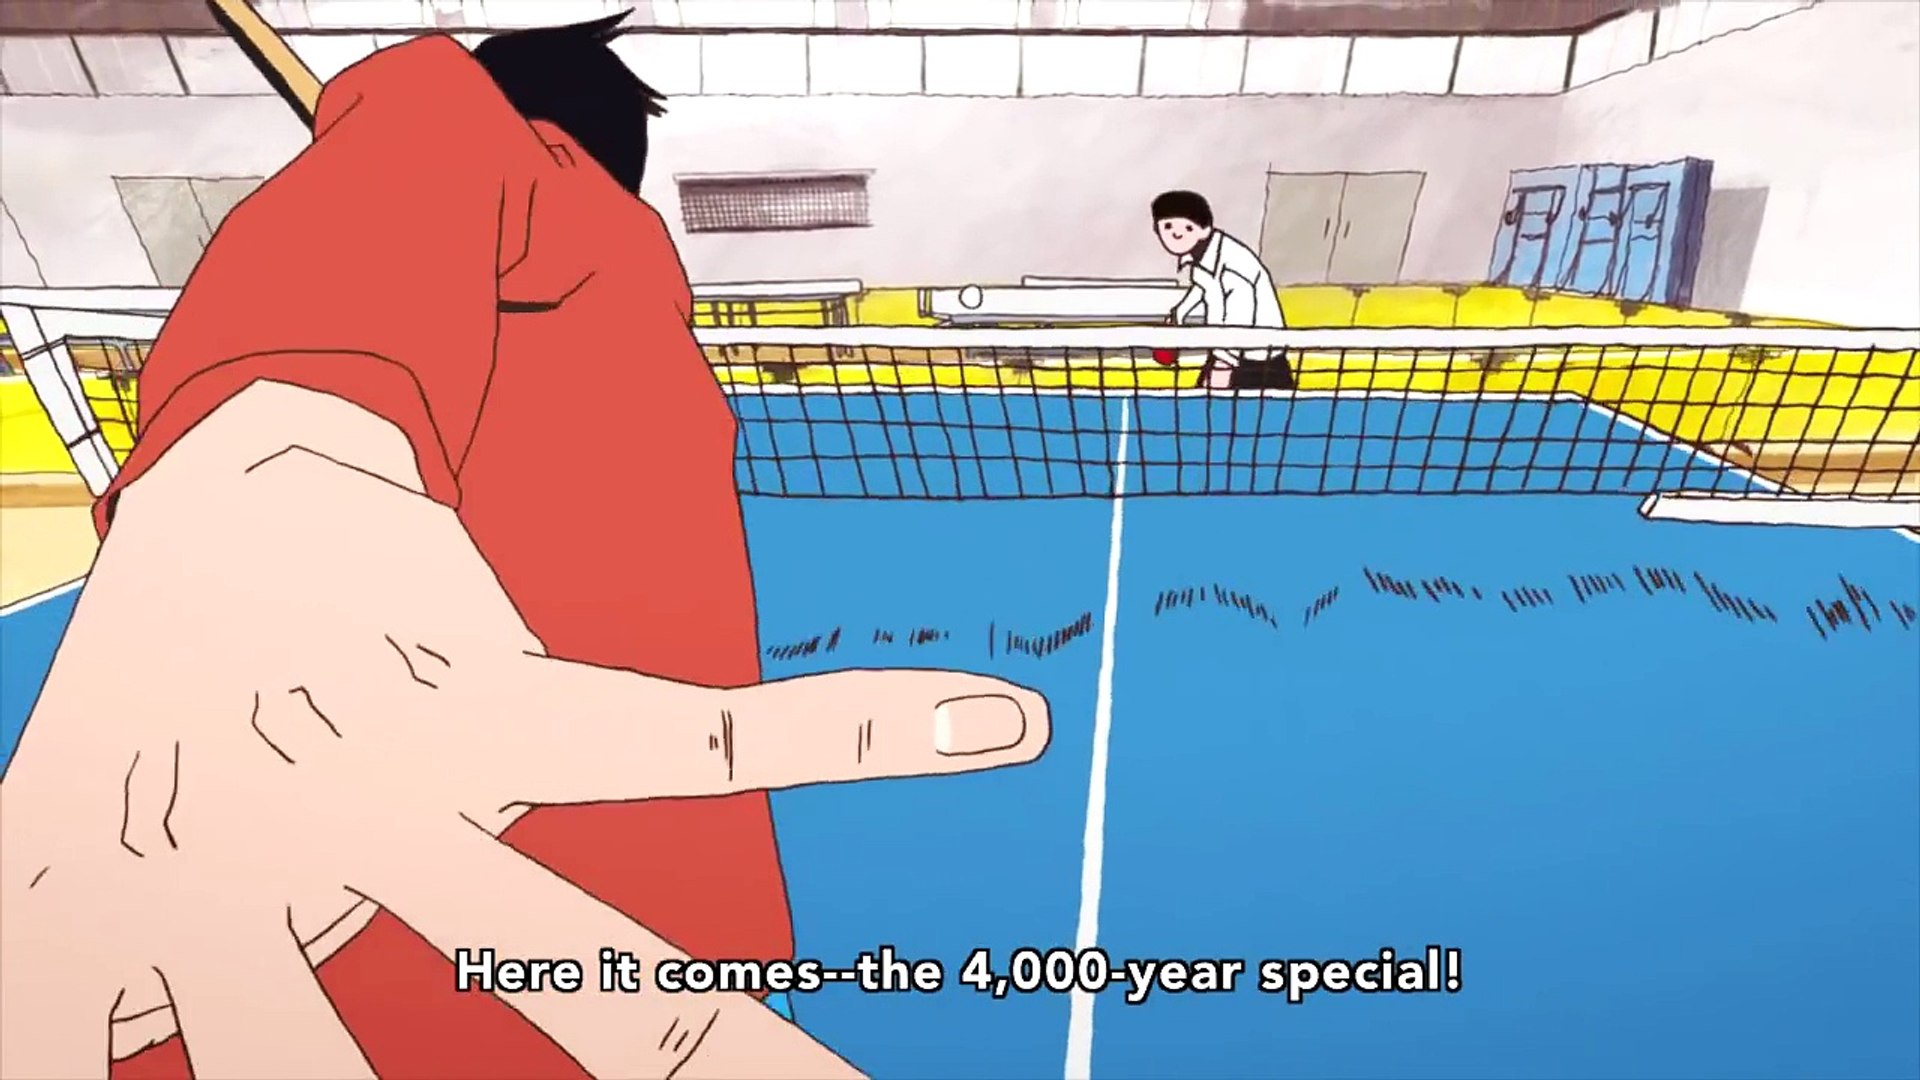 Ping Pong the Animation [720p] - video Dailymotion